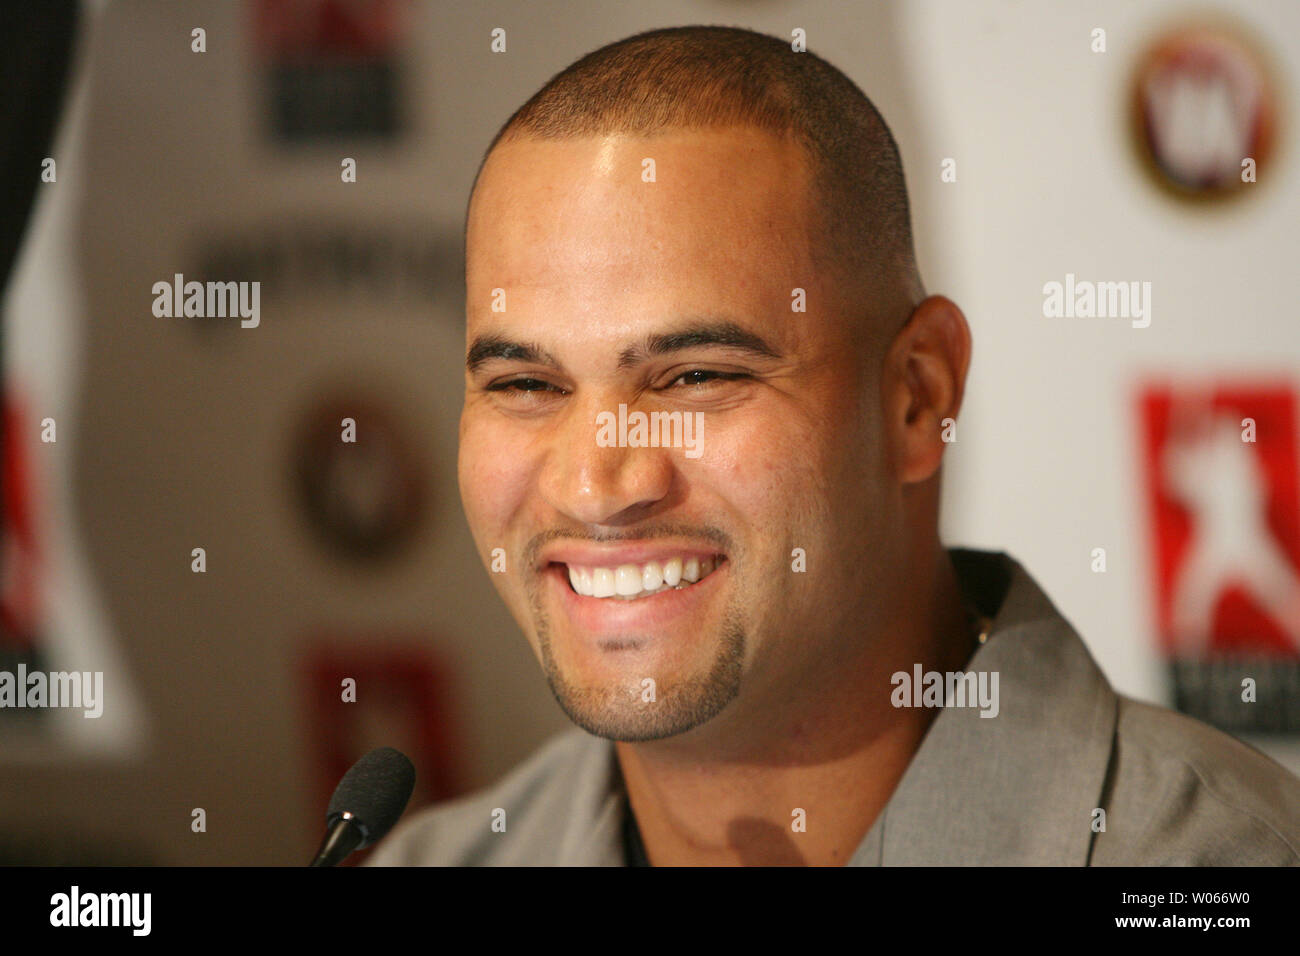 St. Louis Cardinals Albert Pujols smiles big after  announcing he will open a resturant in the fall called PUJOLS FIVE, in the Westport area of St. Louis on June 1, 2006. Pujols hopes that the resturant will help fund the Pujols Family Foundation's 501C3 organization. (UPI Photo/Bill Greenblatt) Stock Photo